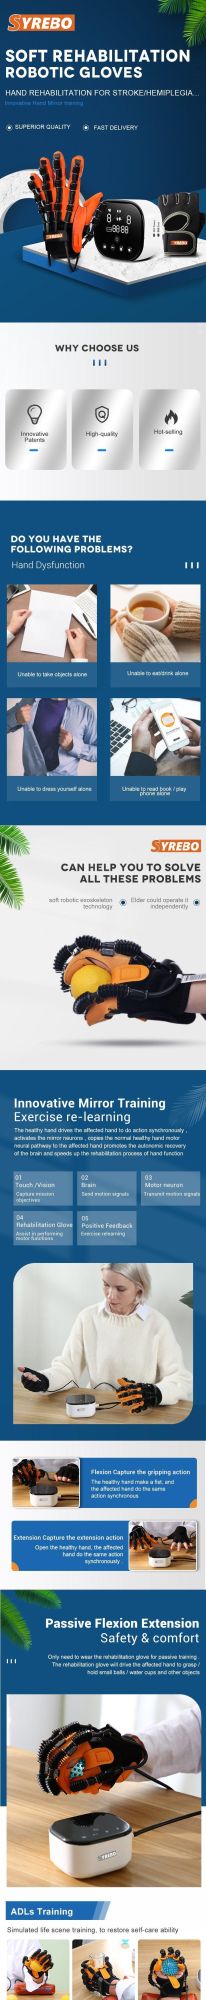 Hand Rehabilitation Robot Premium-Version Mirror Therapy Hand Exercise Training with The Only Air Compression Glove Design